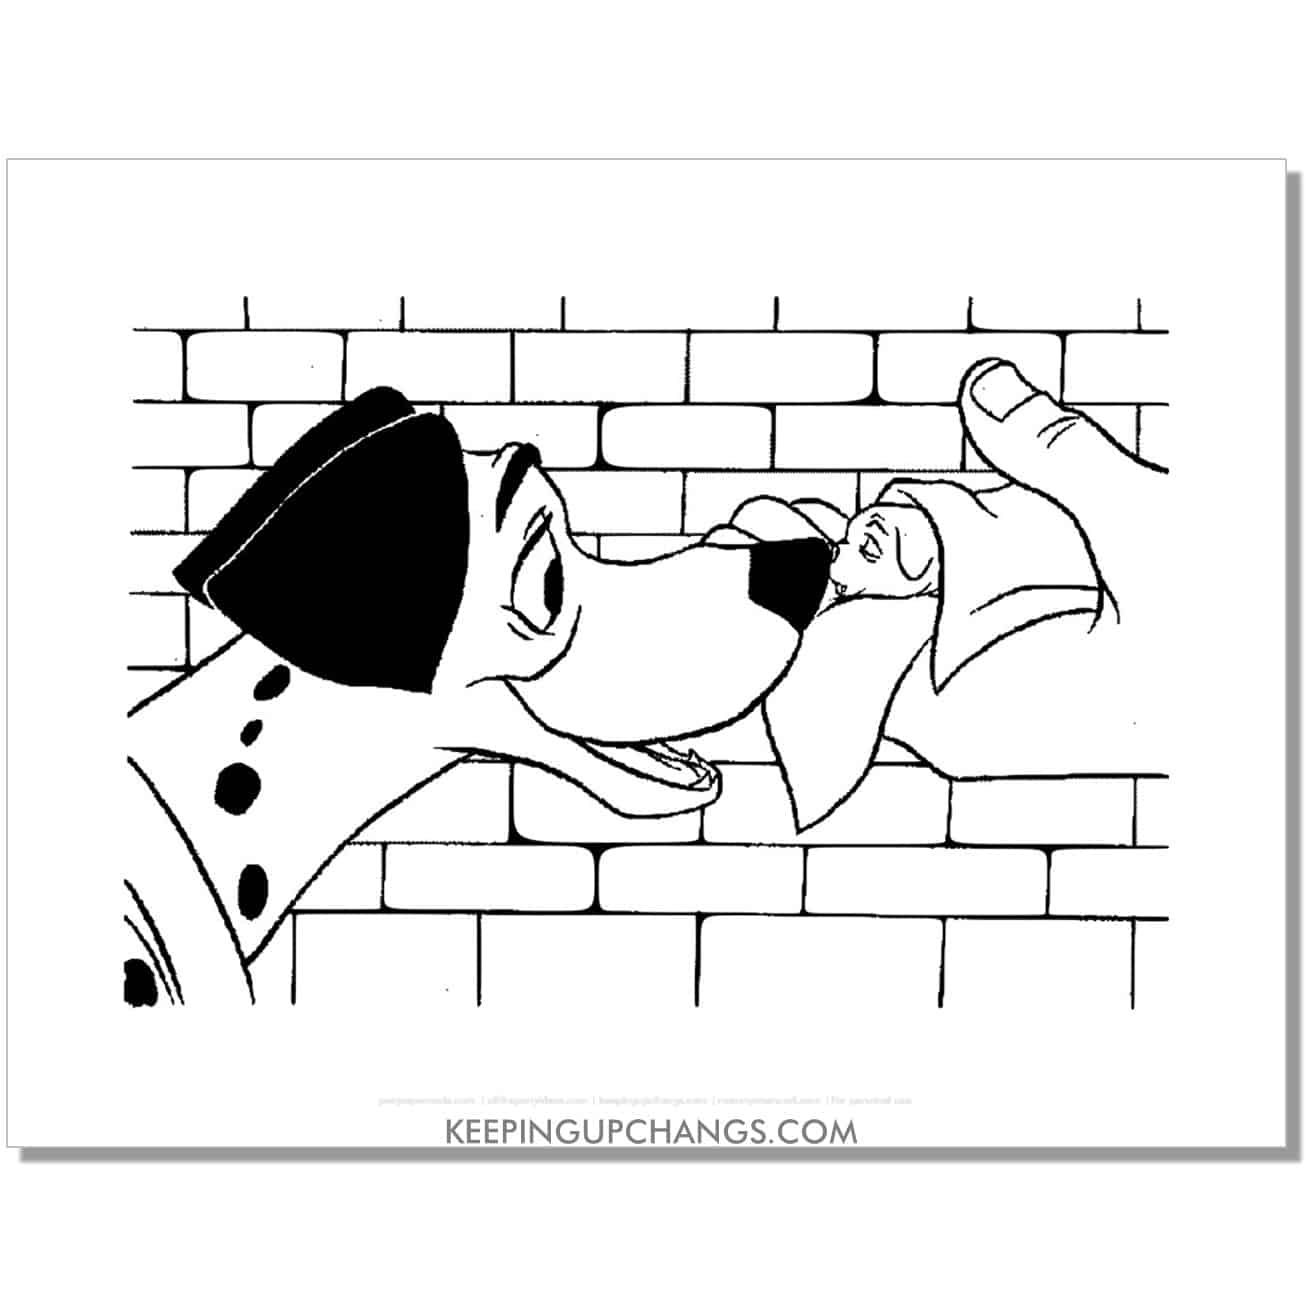 free pongo meets baby puppy 101 dalmations coloring page, sheet.